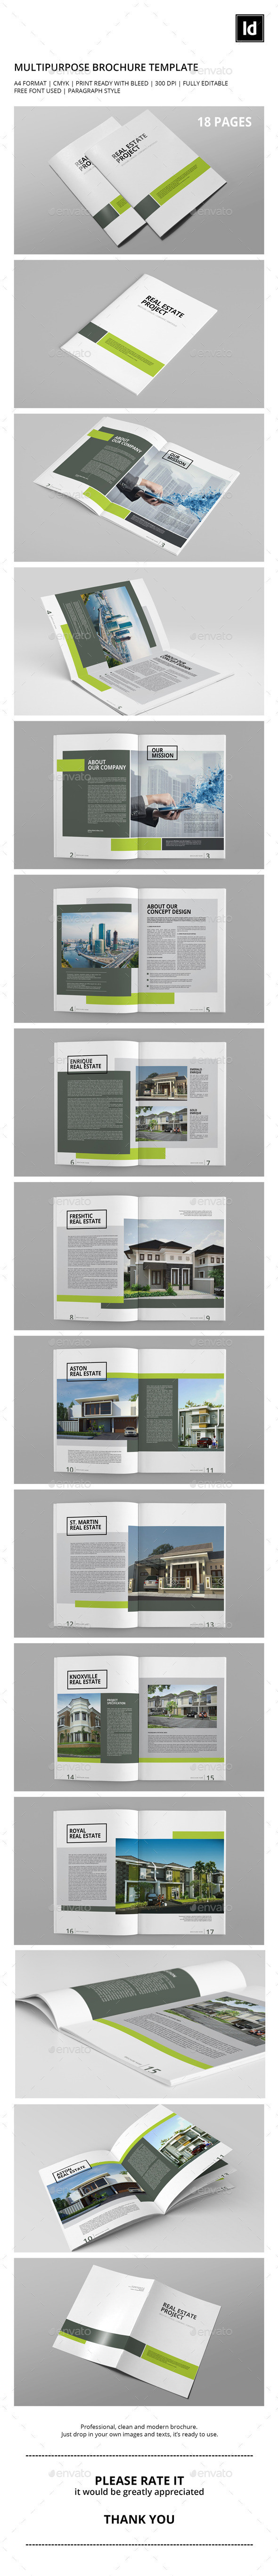 Preview image brochure